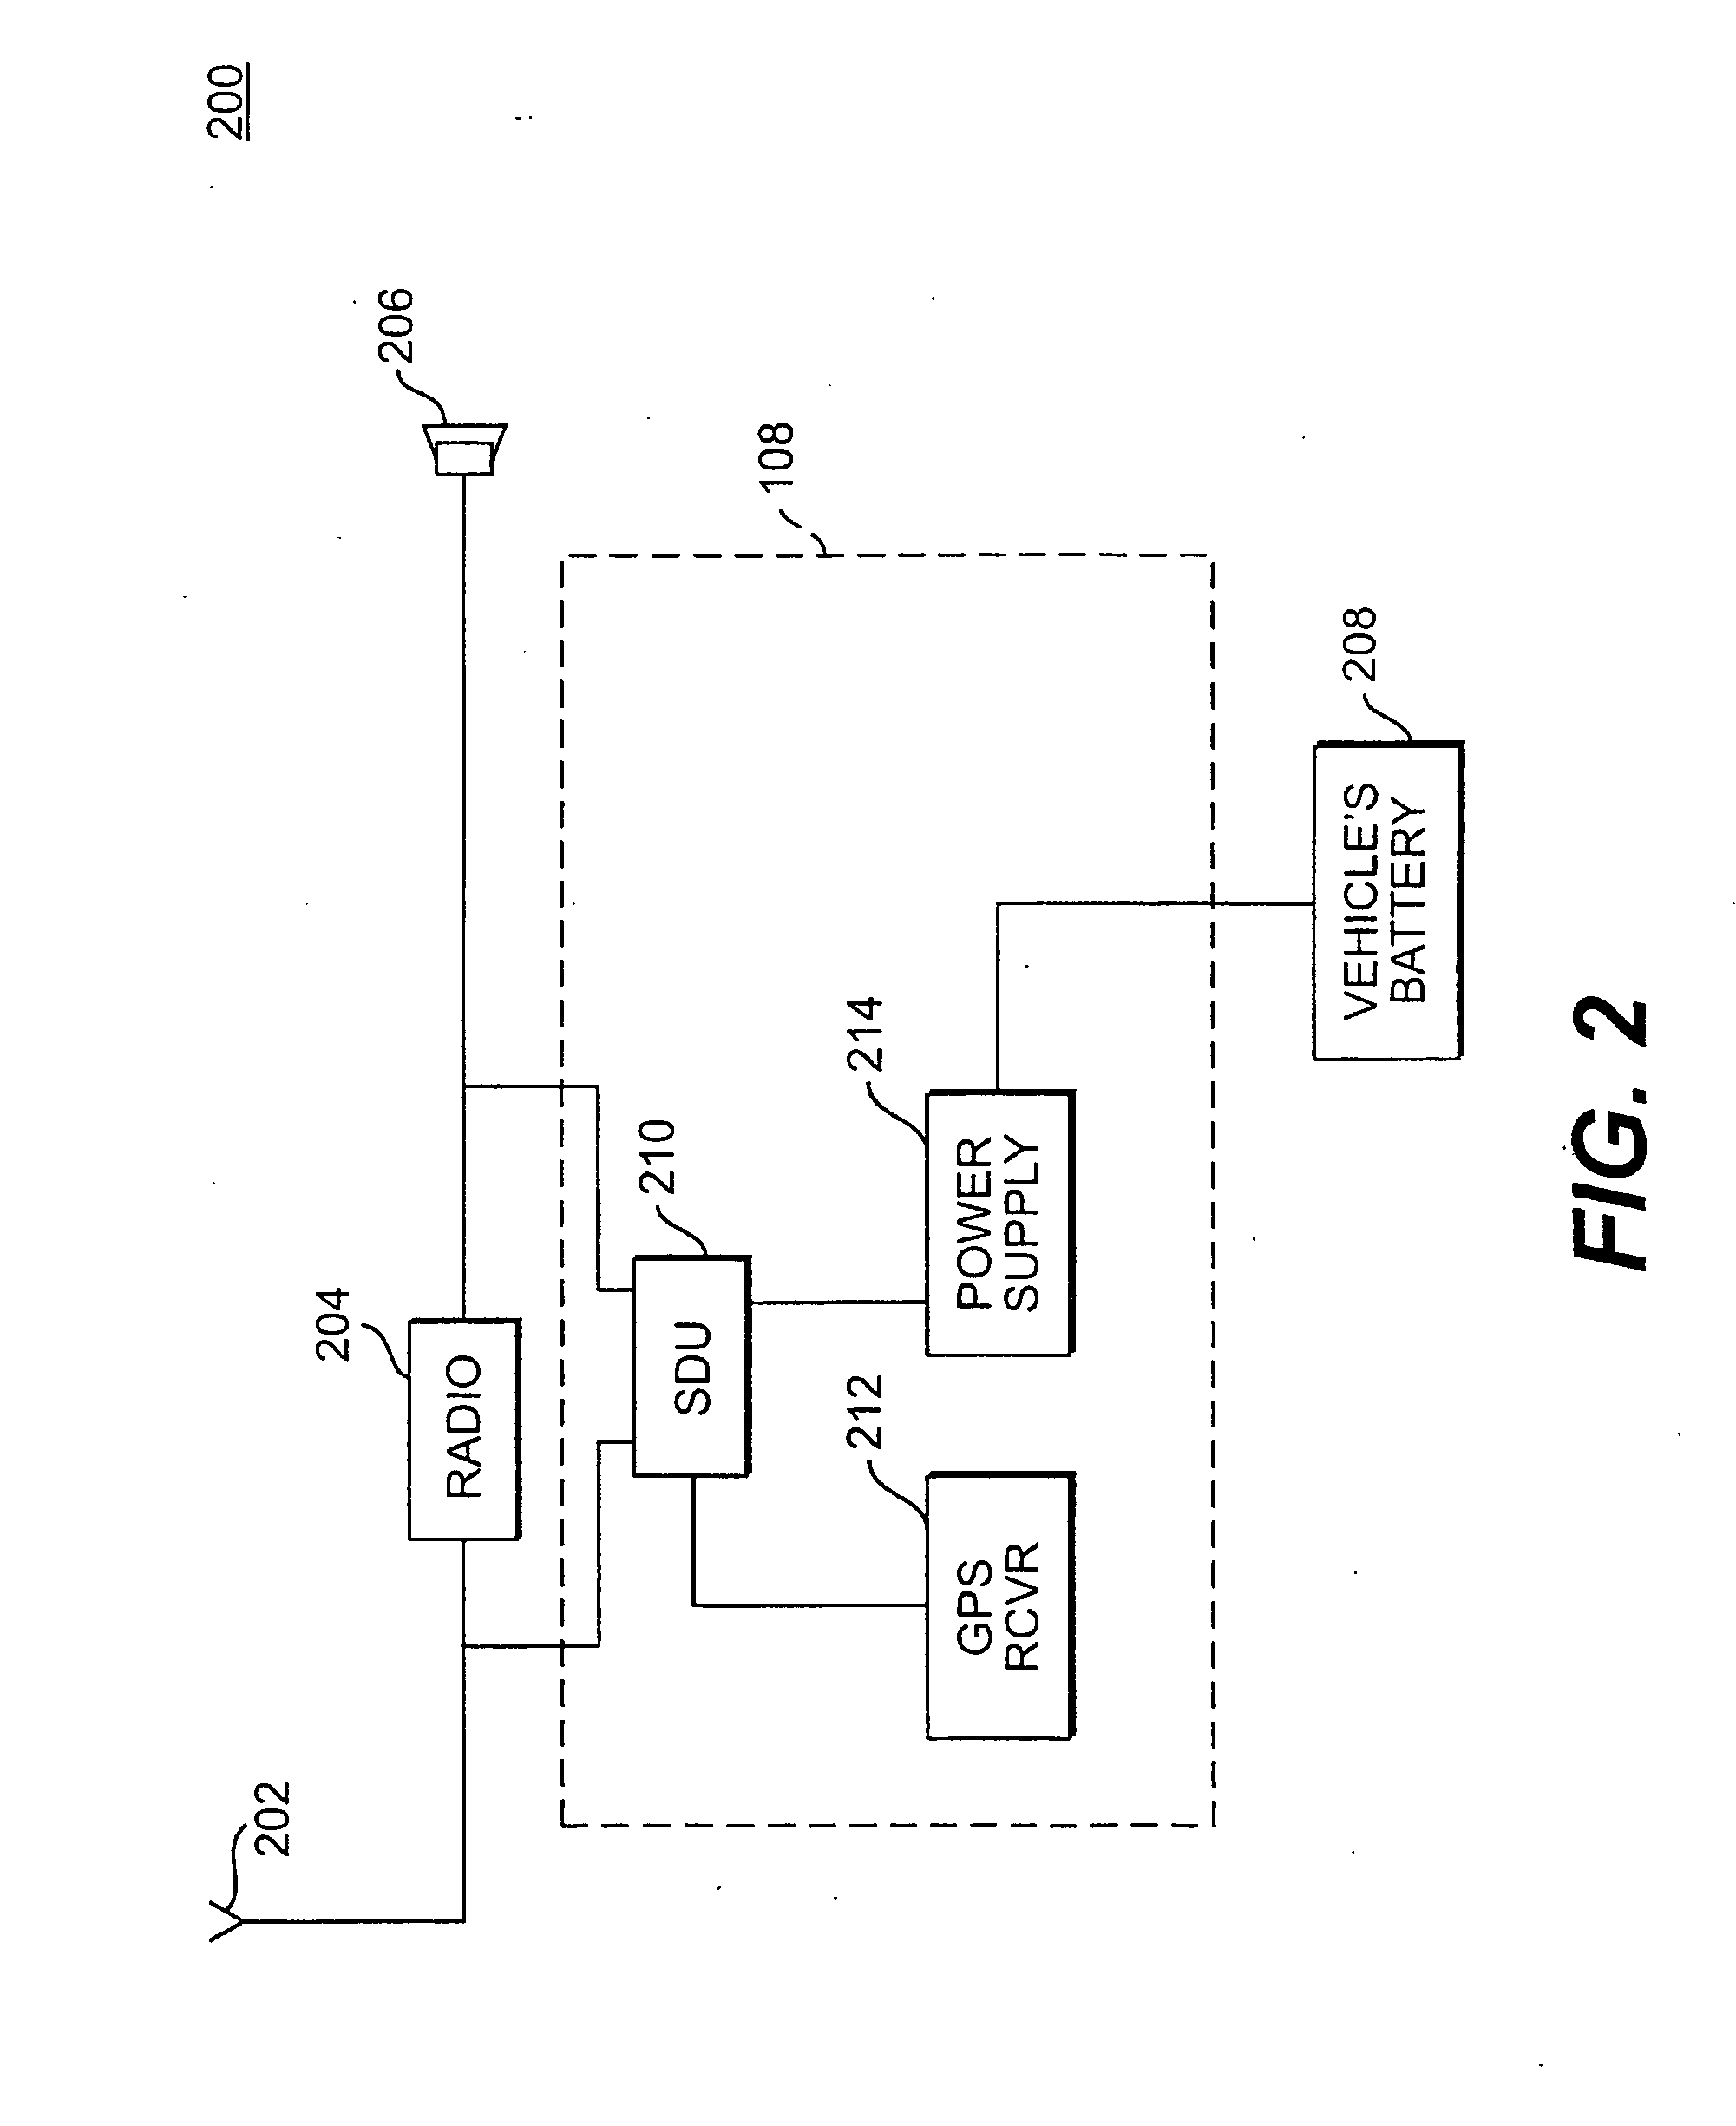 System and Method for Obtaining Consumer Related Statistics